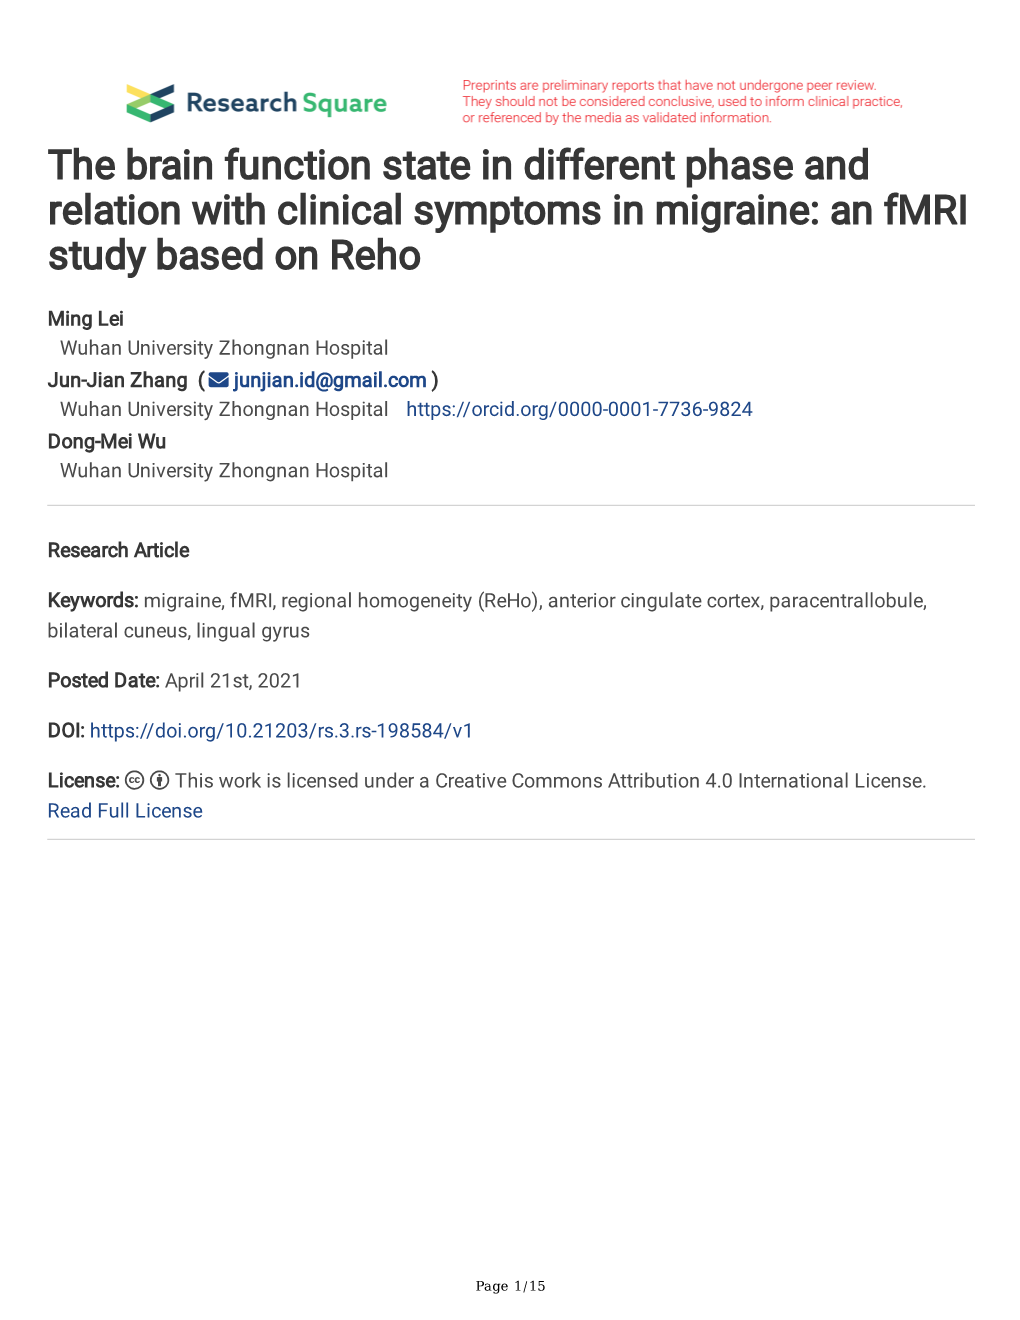 The Brain Function State in Different Phase and Relation with Clinical Symptoms in Migraine: an Fmri Study Based on Reho